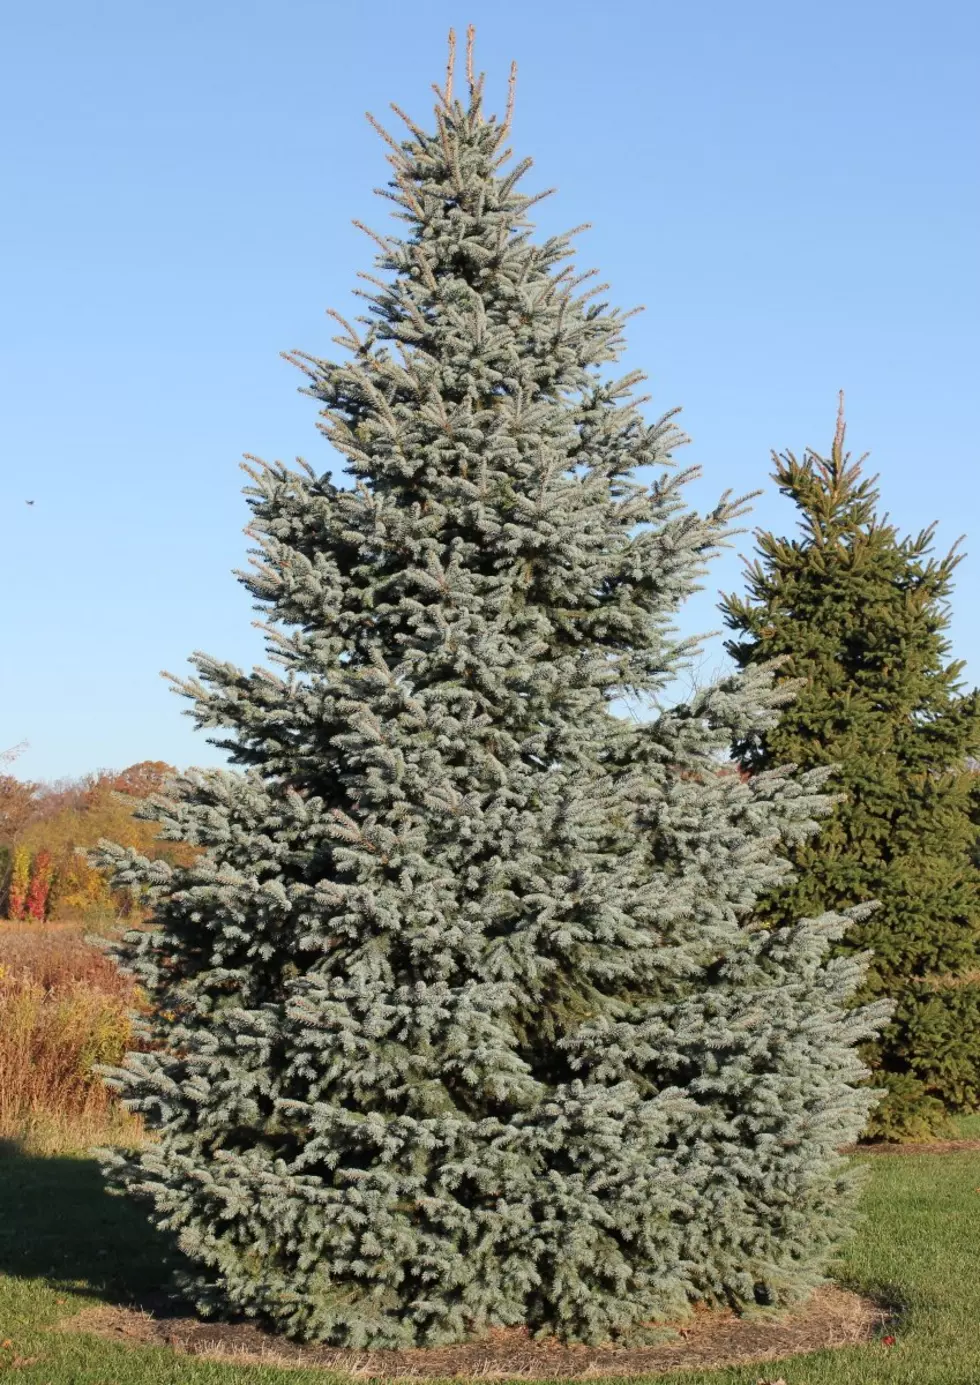 Supply Chain and Heat Wave May Cause Christmas Tree Shortage